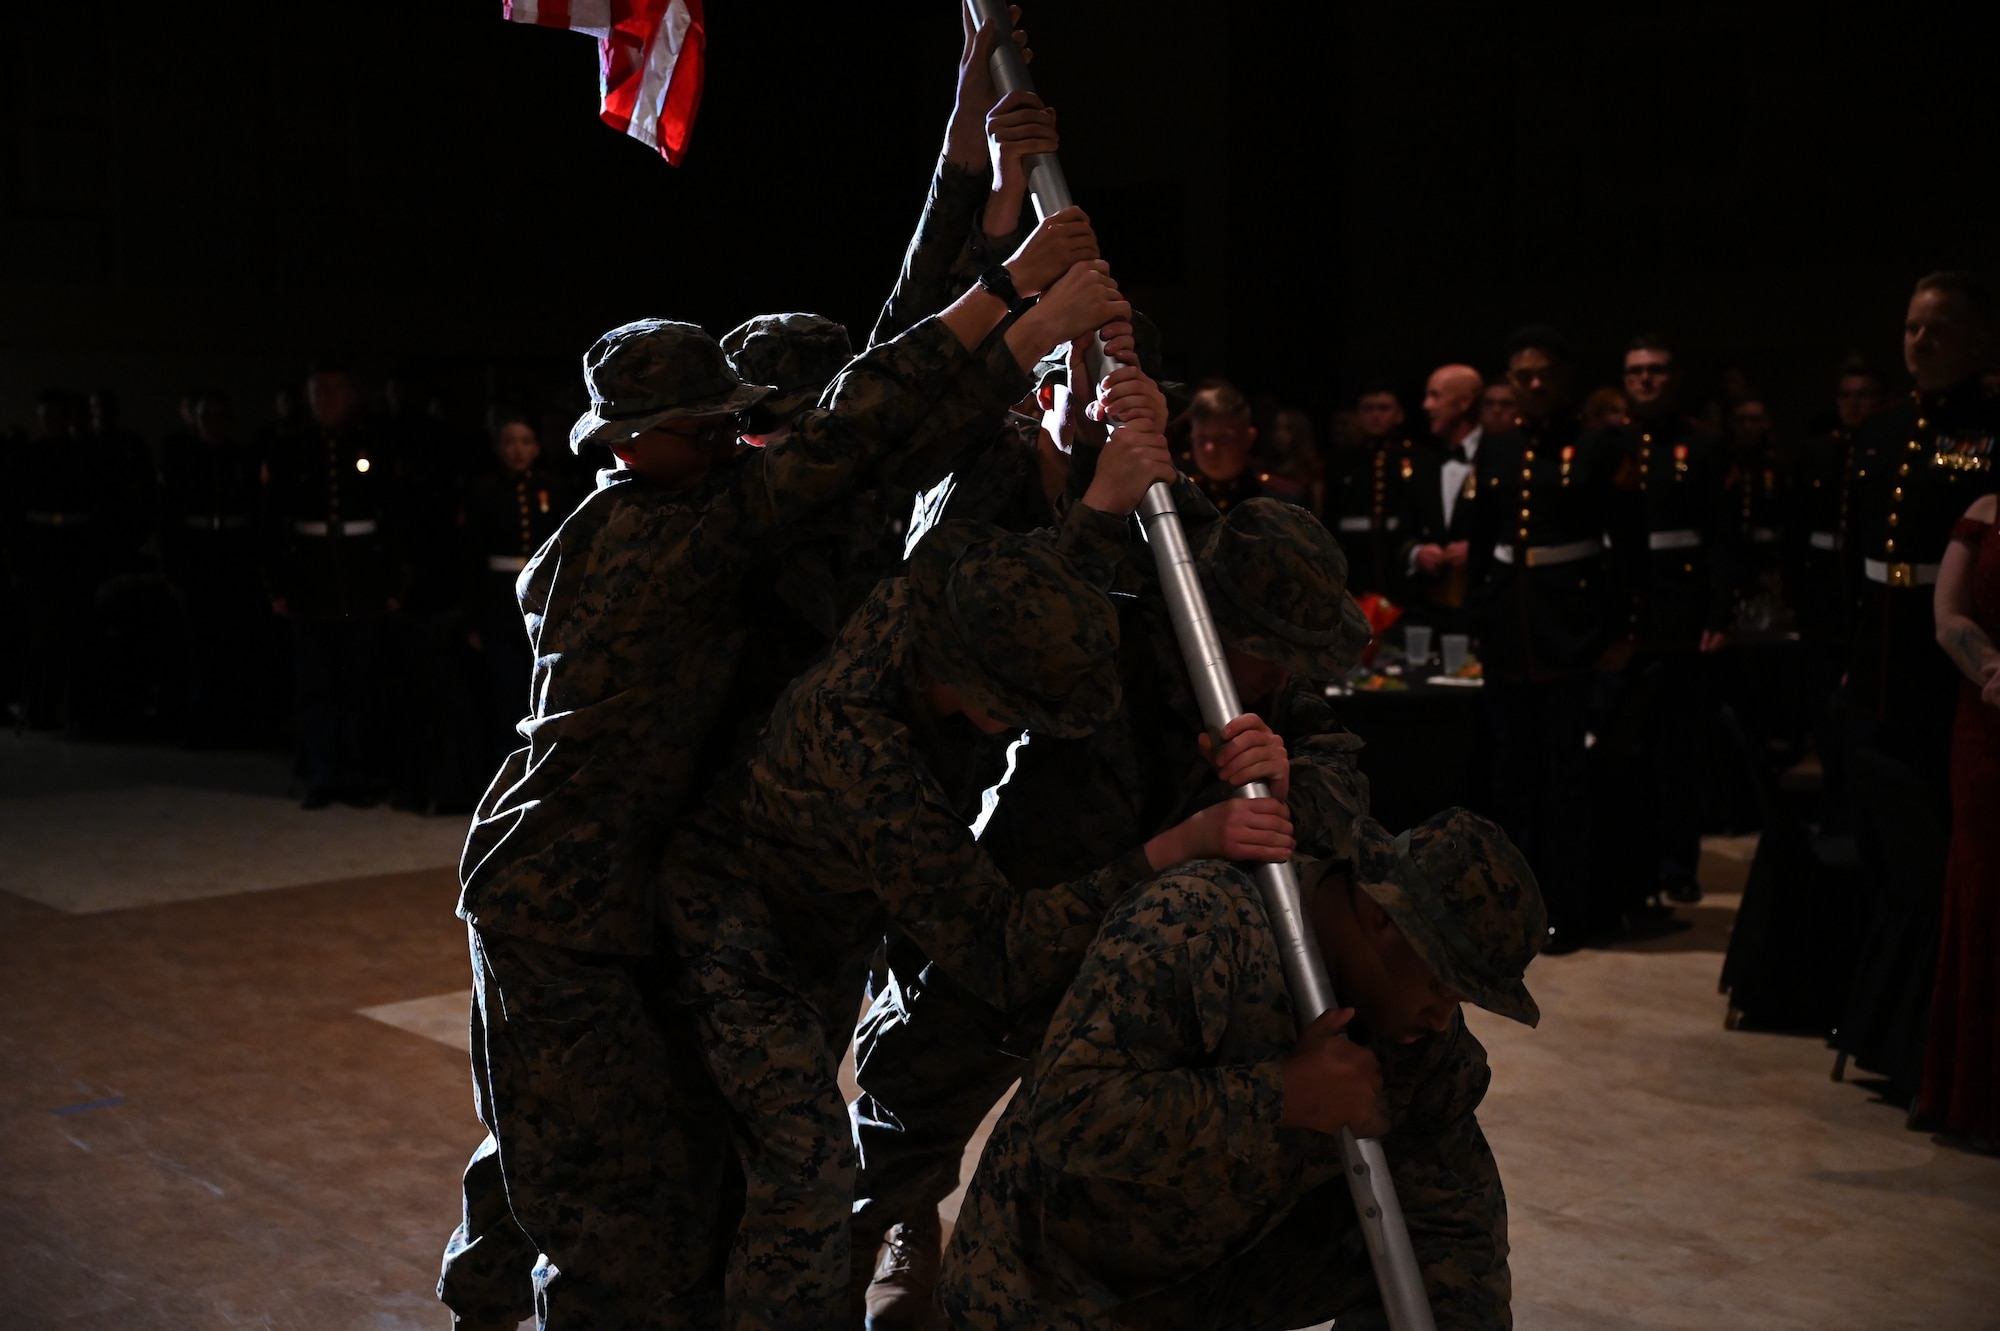 Marines assigned to Marine Corps Detachment Goodfellow recreate the famous scene of raising the American flag after the victory at Iwo Jima during the opening ceremonies at the McNease Convention Center, San Angelo, Texas, Nov. 4, 2022. The opening ceremonies consisted of various events paying homage to the 247-year-old history of the United States Marine Corps. (U.S. Air Force photo by Senior Airman Michael Bowman)